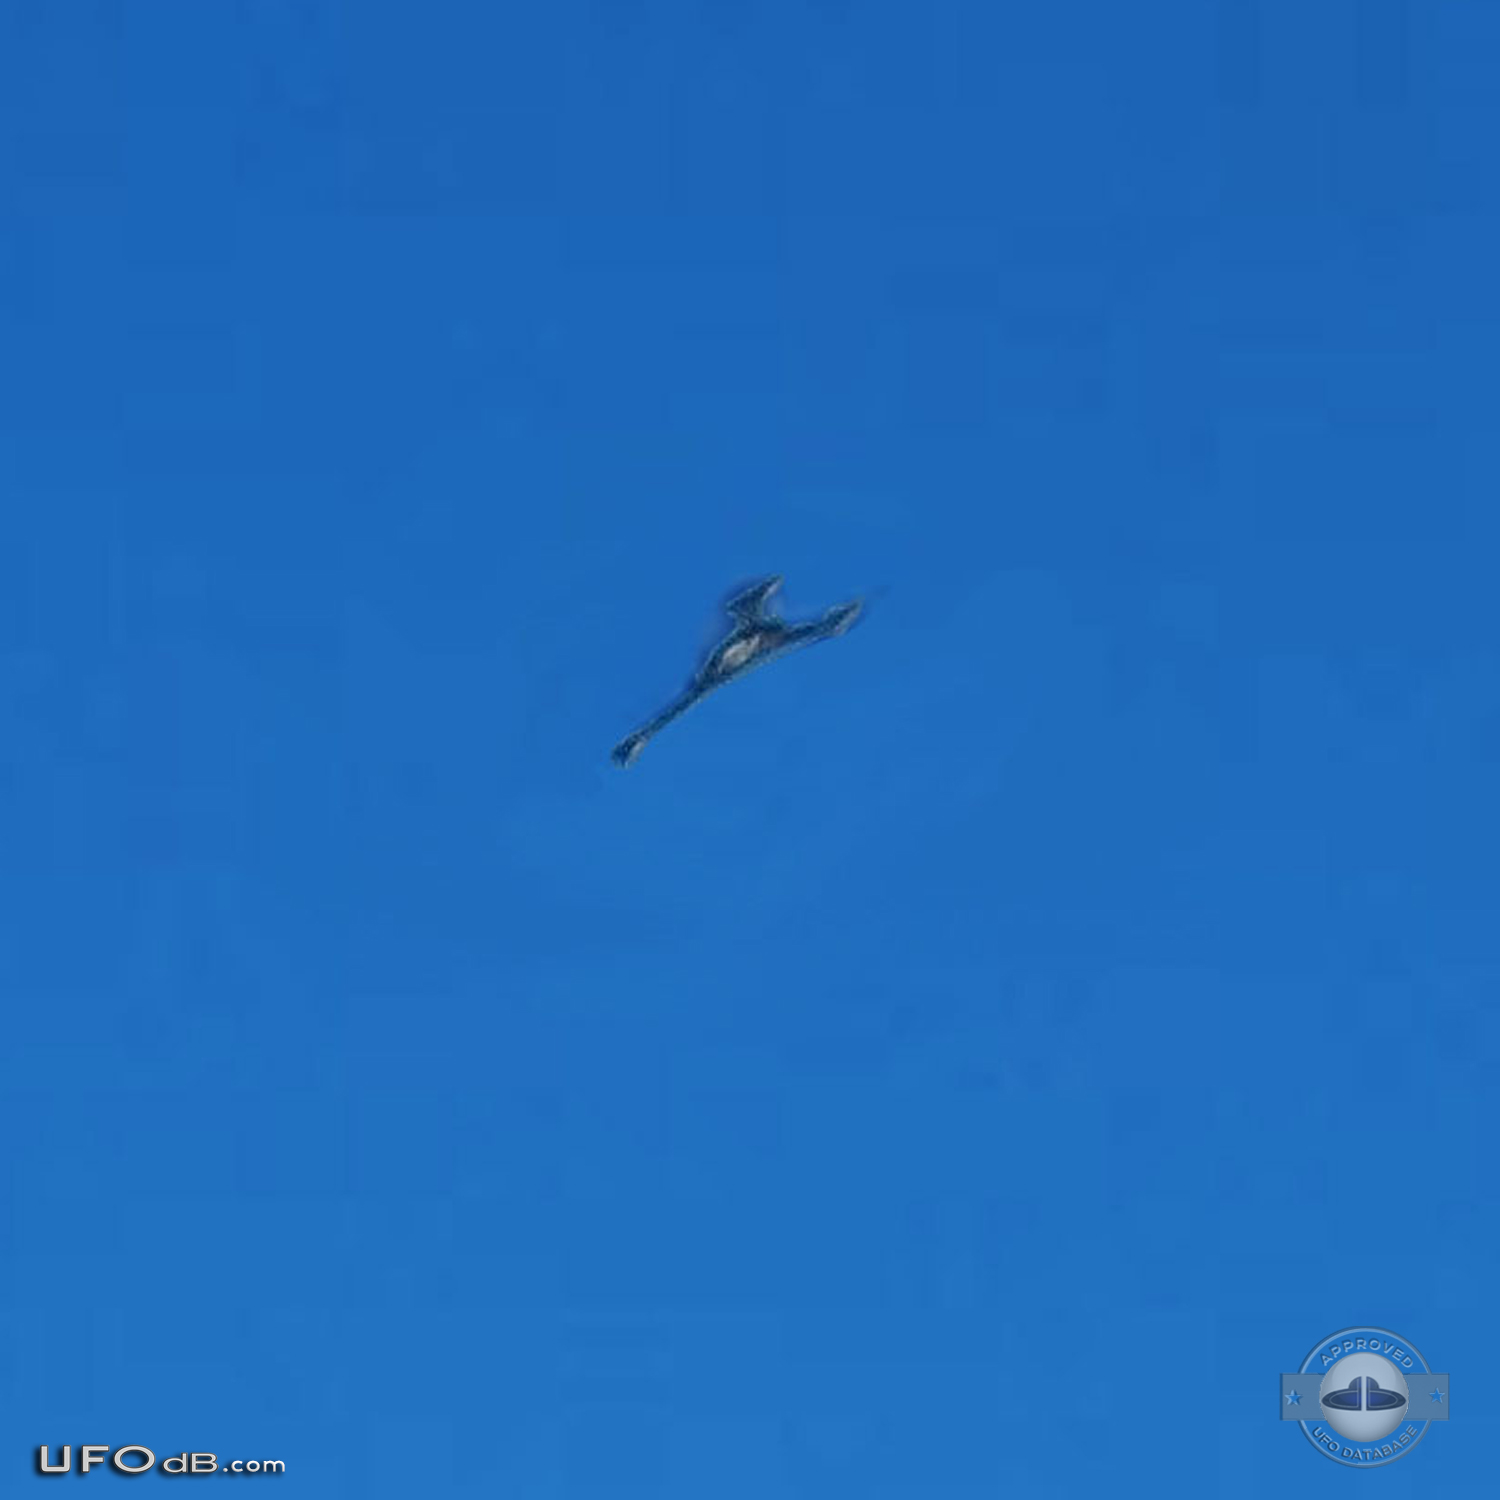 UFO similar to Star Trek Klingon ship seen over Canary Island in 2011 UFO Picture #483-3